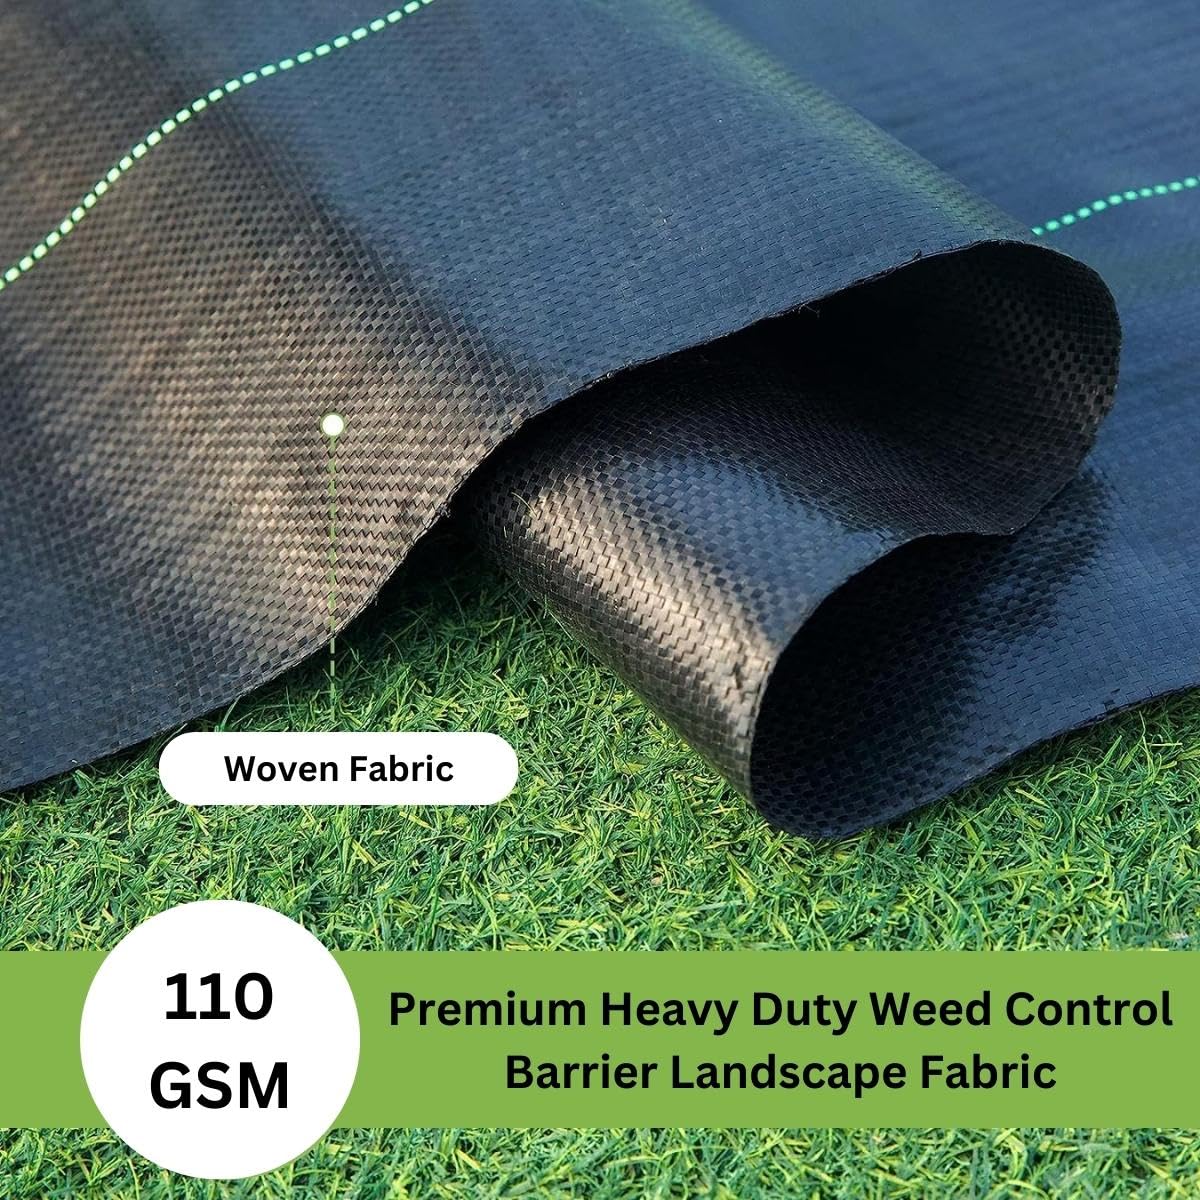 Singhal Premium Garden Weed Control Barrier Sheet Mat 1 Meter x 15 Meter, Landscape Fabric 110 GSM Heavy Duty Weed Block Gardening Mat for Gardens, Agriculture, Outdoor Projects (Black)